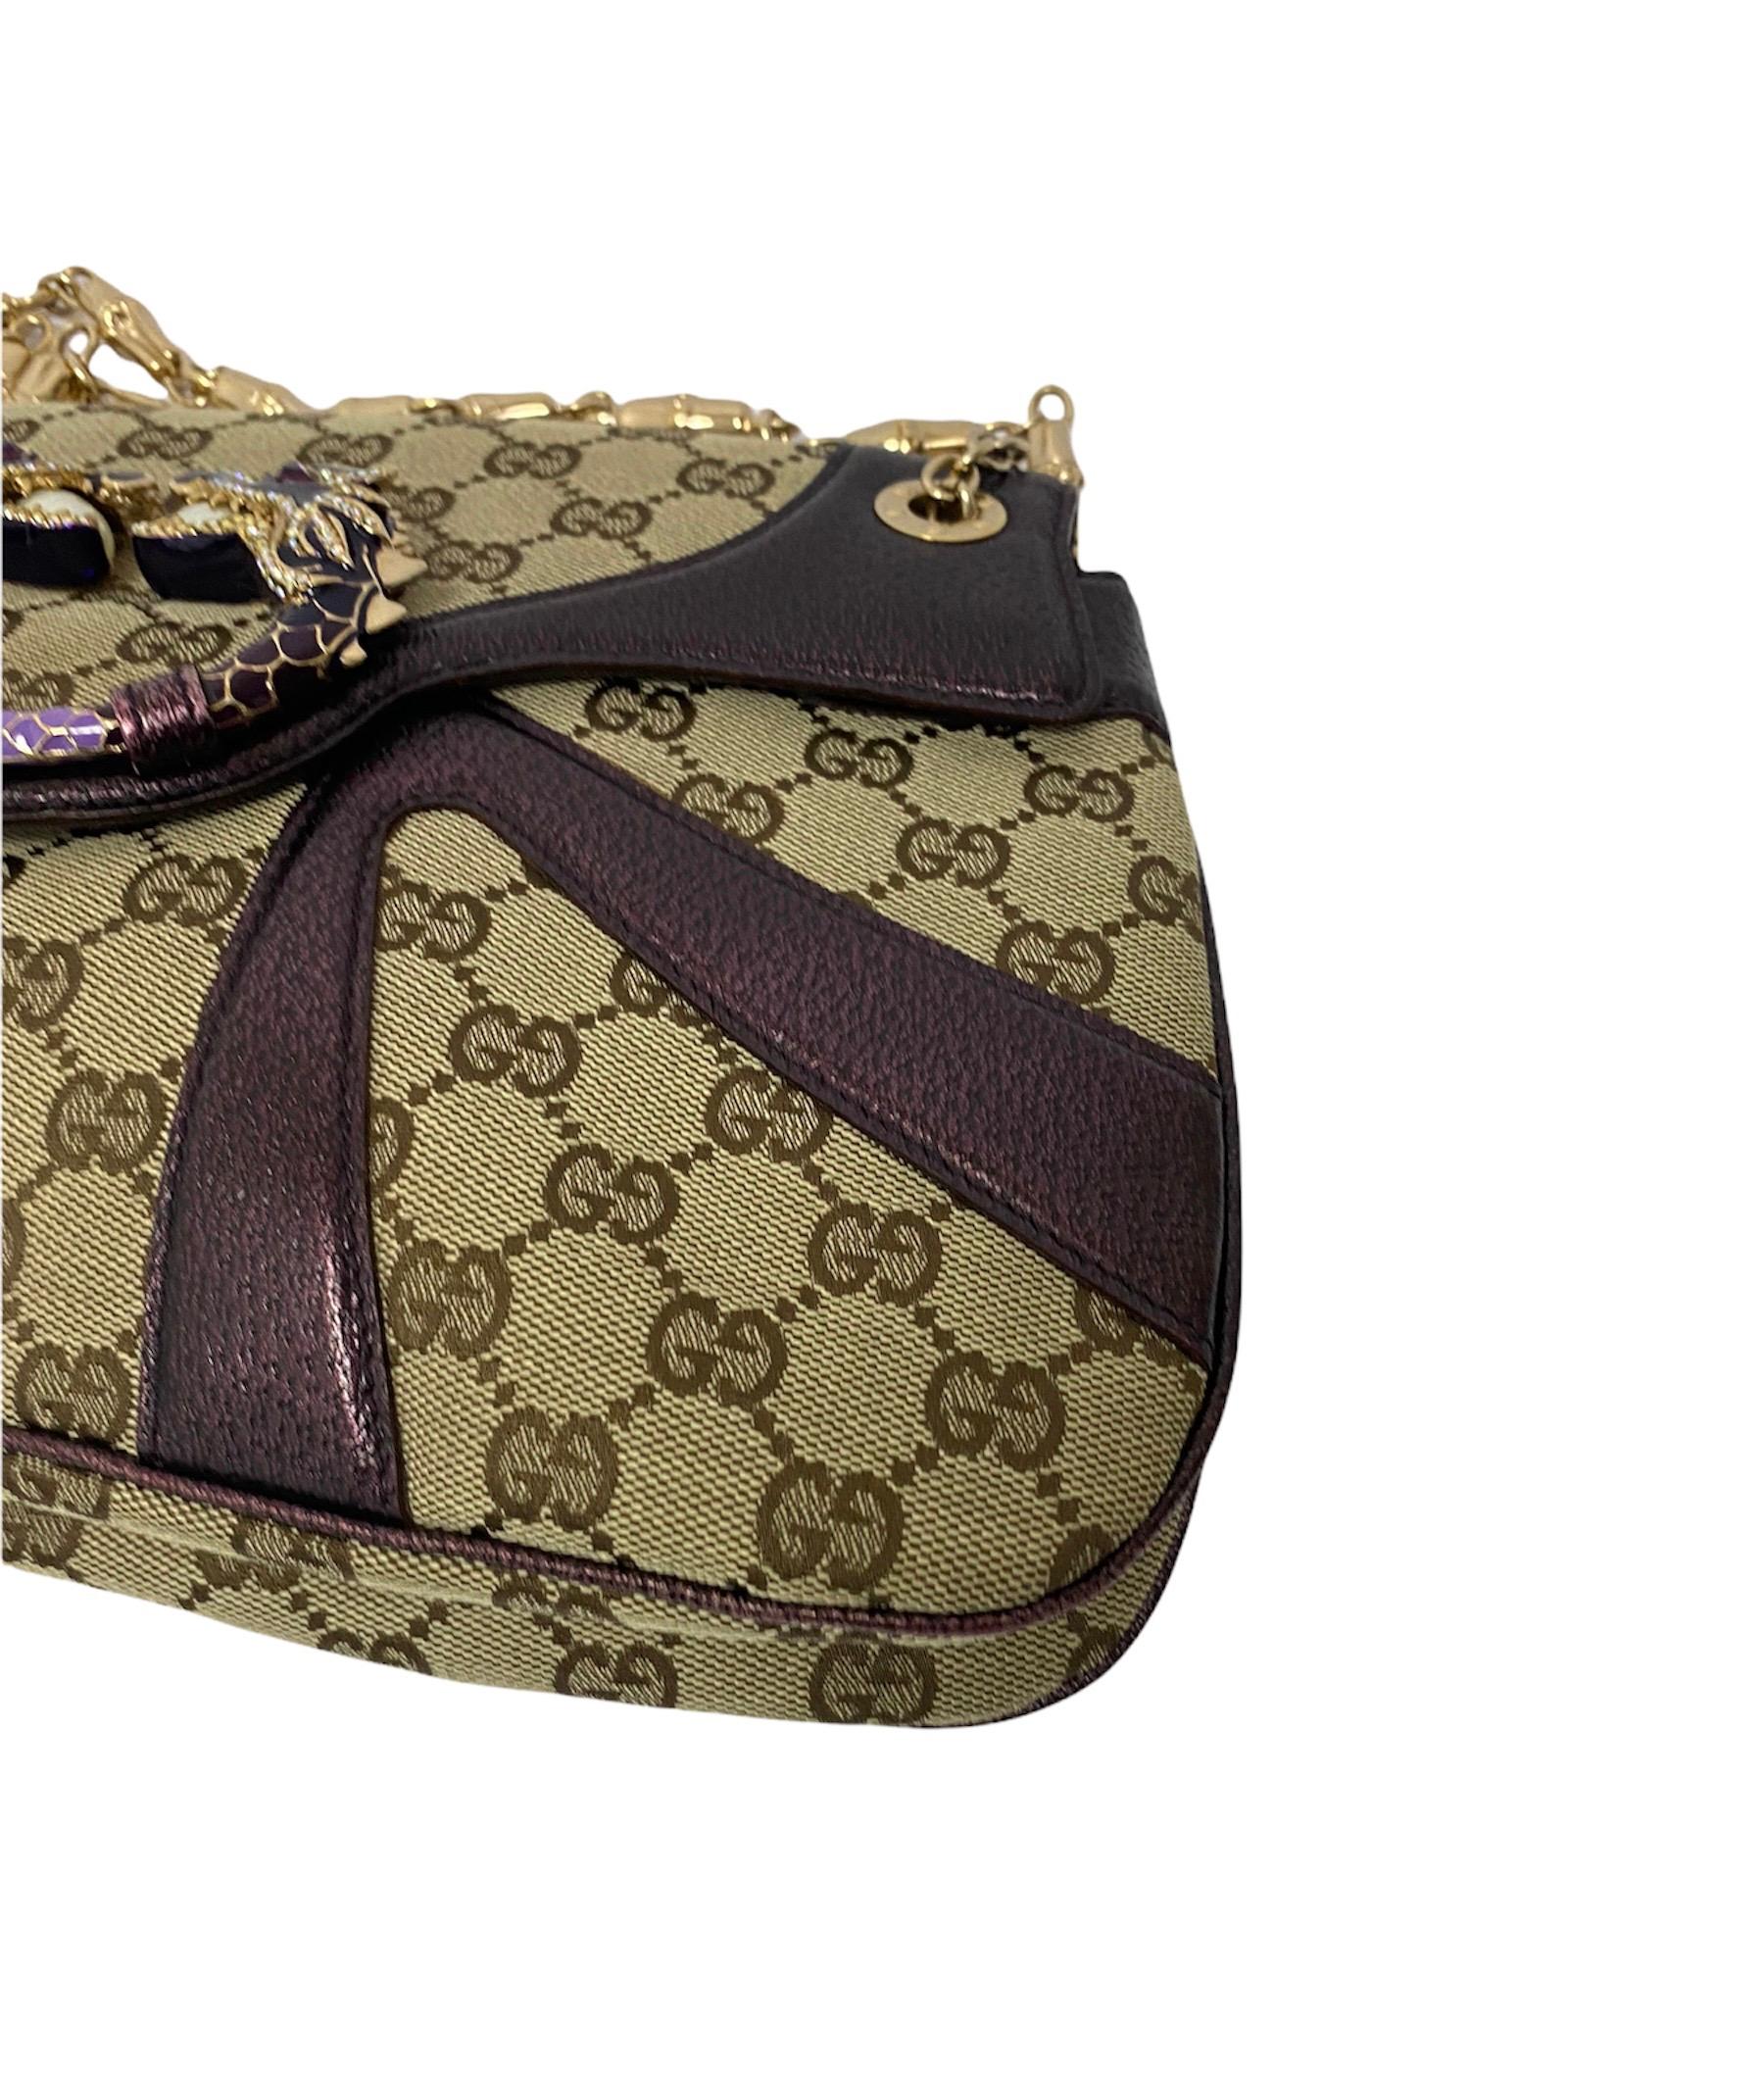 Black Gucci Beige Canvas and Purple Leather jewel Bags